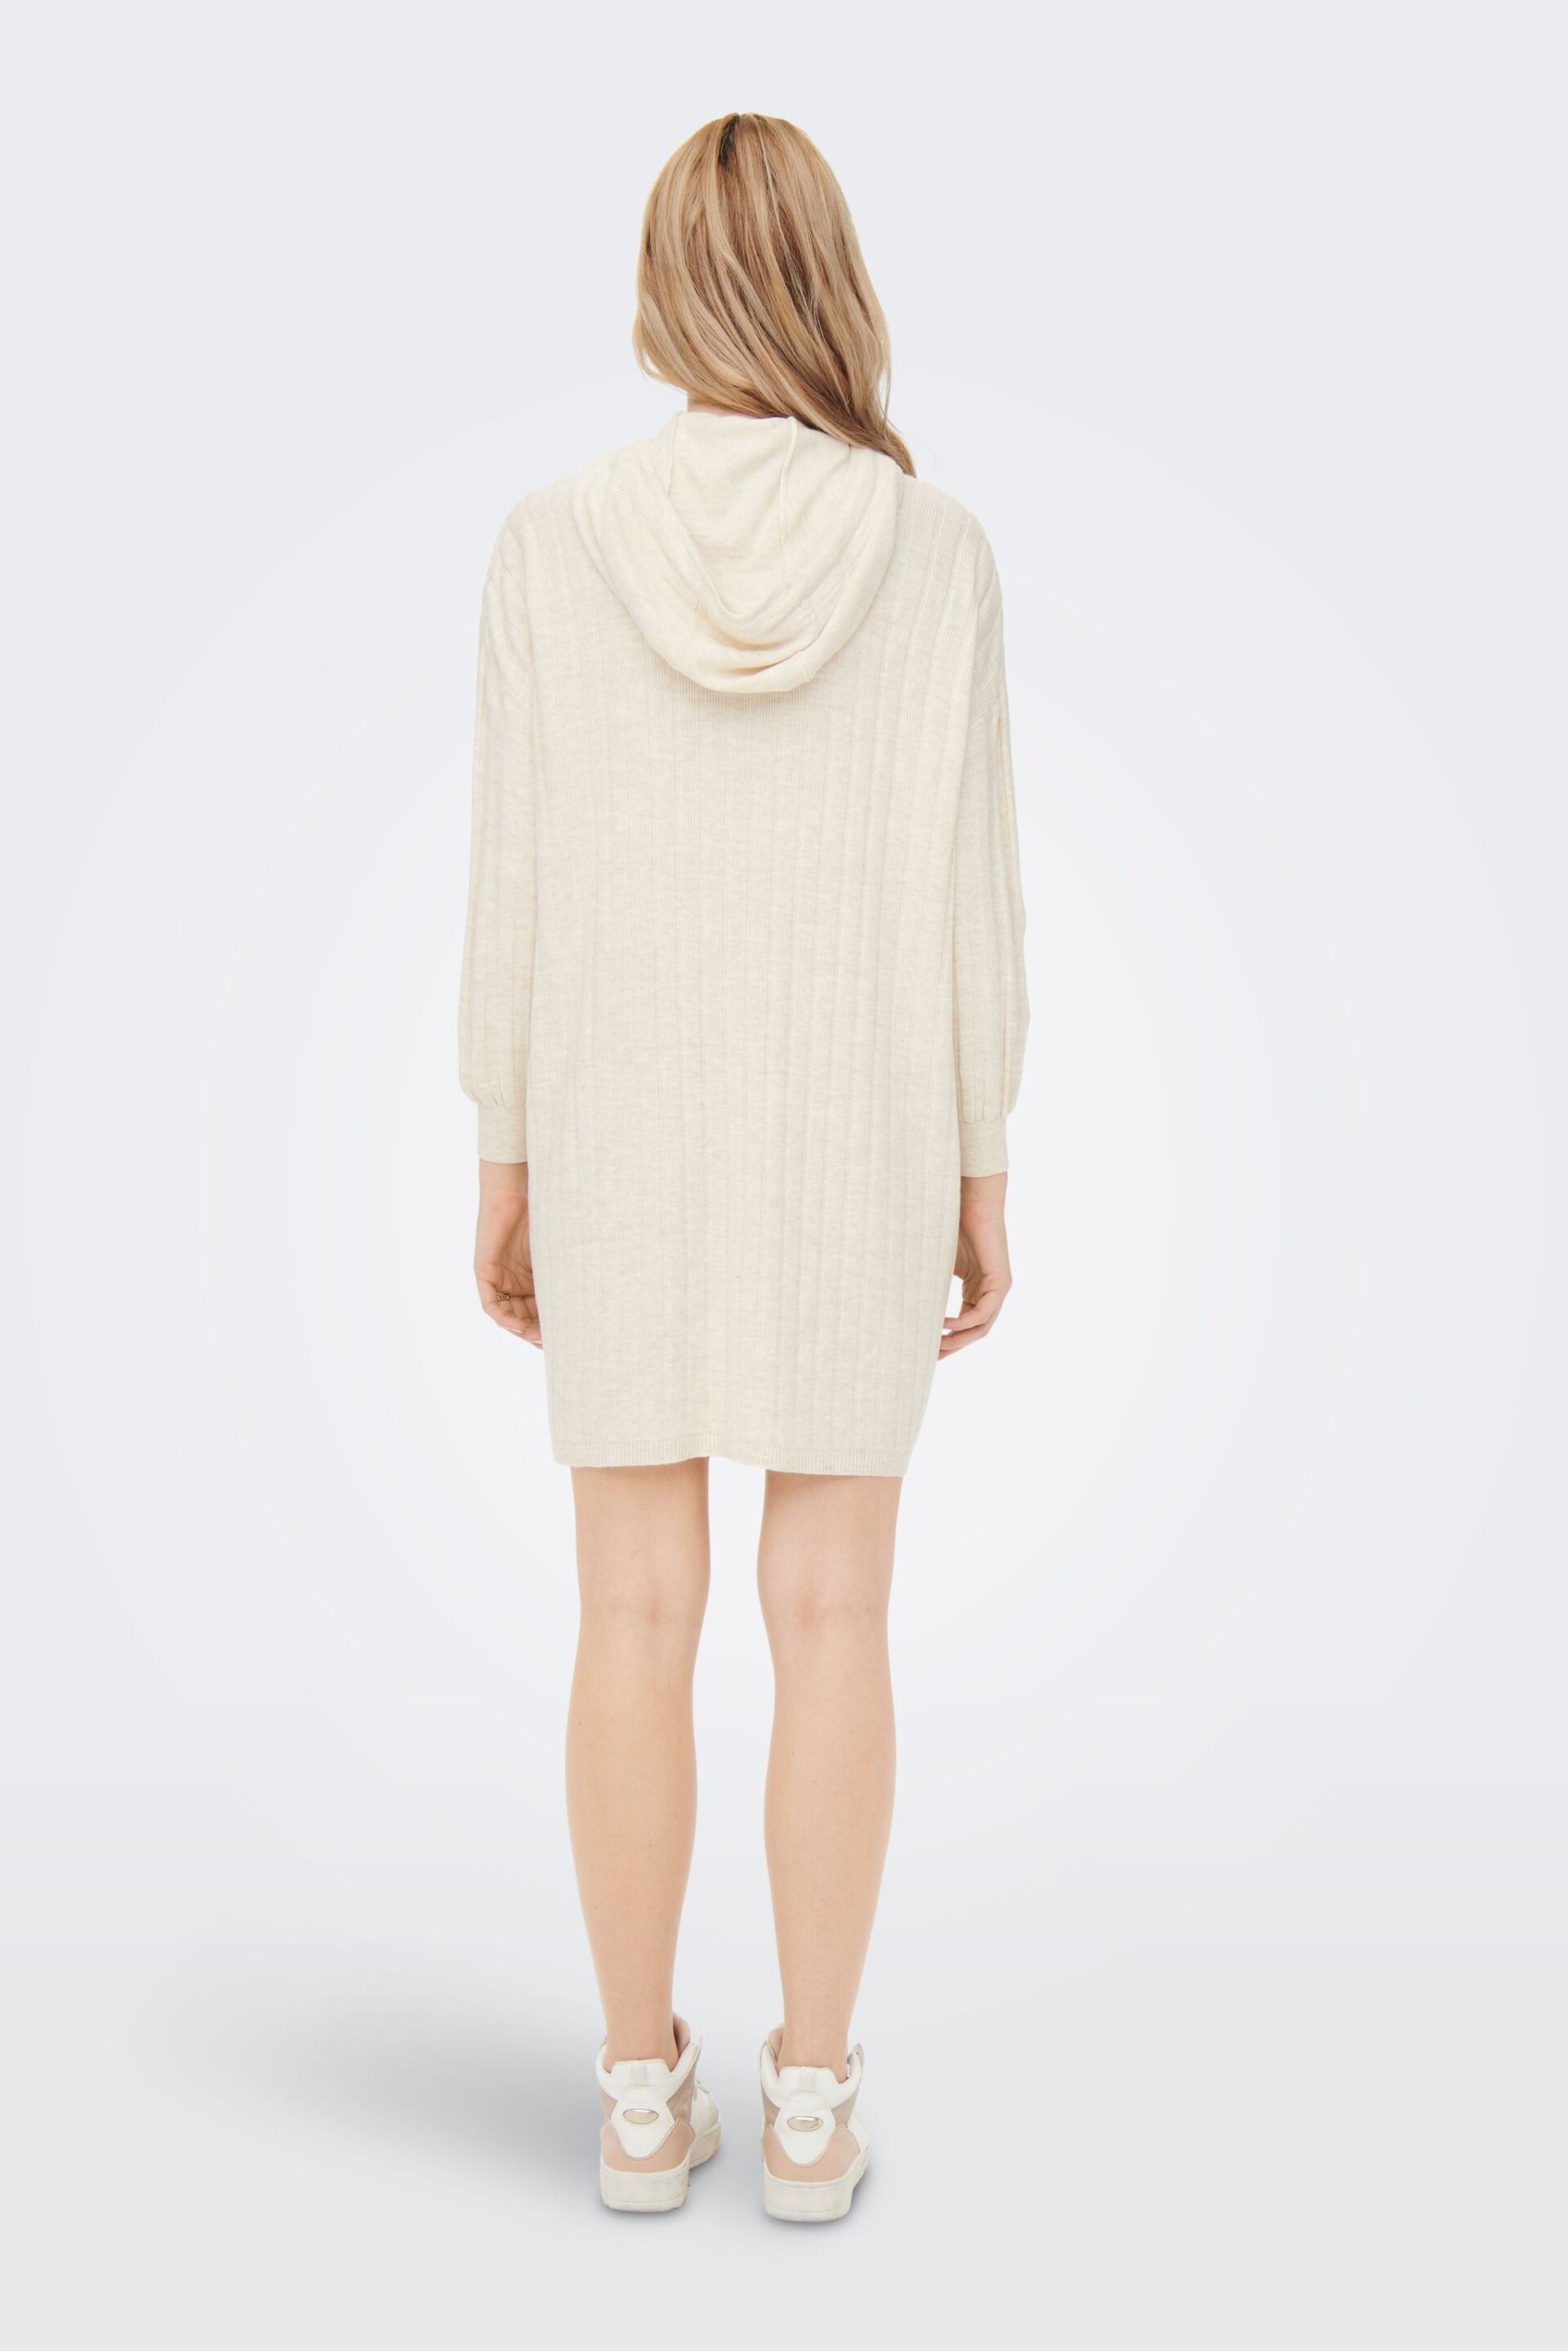 ONLY Cream Knitted Hooded Cosy Lounge Jumper Dress - Image 2 of 6